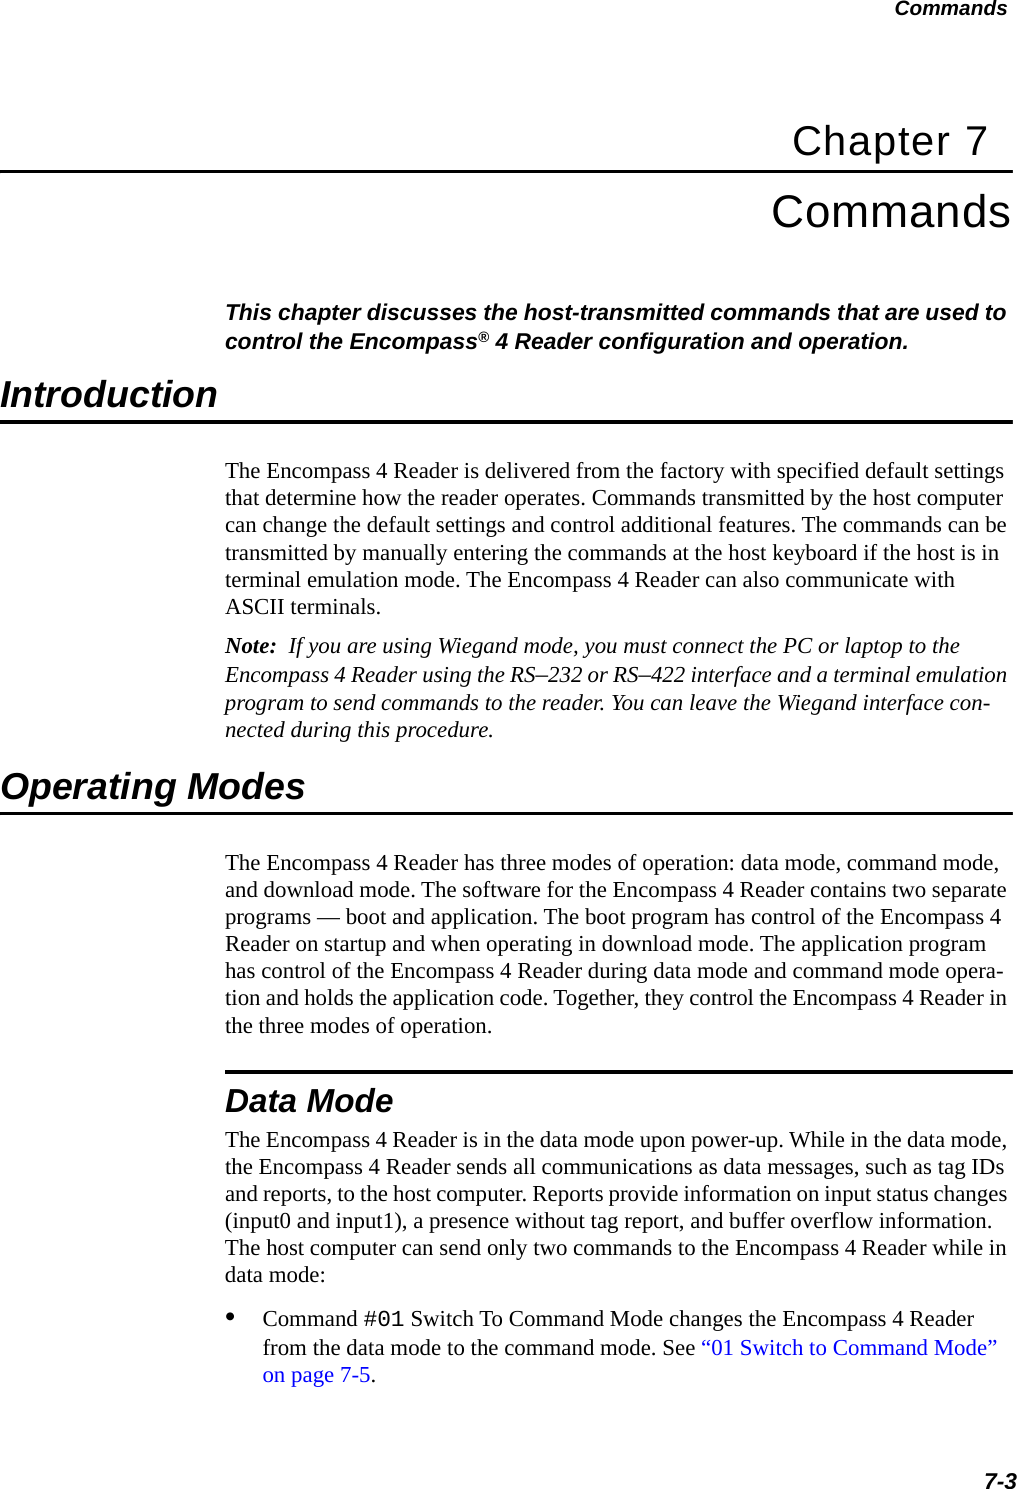 Commands7-3Chapter 7CommandsThis chapter discusses the host-transmitted commands that are used to control the Encompass® 4 Reader configuration and operation.IntroductionThe Encompass 4 Reader is delivered from the factory with specified default settings that determine how the reader operates. Commands transmitted by the host computer can change the default settings and control additional features. The commands can be transmitted by manually entering the commands at the host keyboard if the host is in terminal emulation mode. The Encompass 4 Reader can also communicate with ASCII terminals.Note:  If you are using Wiegand mode, you must connect the PC or laptop to the Encompass 4 Reader using the RS–232 or RS–422 interface and a terminal emulation program to send commands to the reader. You can leave the Wiegand interface con-nected during this procedure. Operating ModesThe Encompass 4 Reader has three modes of operation: data mode, command mode, and download mode. The software for the Encompass 4 Reader contains two separate programs — boot and application. The boot program has control of the Encompass 4 Reader on startup and when operating in download mode. The application program has control of the Encompass 4 Reader during data mode and command mode opera-tion and holds the application code. Together, they control the Encompass 4 Reader in the three modes of operation.Data ModeThe Encompass 4 Reader is in the data mode upon power-up. While in the data mode, the Encompass 4 Reader sends all communications as data messages, such as tag IDs and reports, to the host computer. Reports provide information on input status changes (input0 and input1), a presence without tag report, and buffer overflow information. The host computer can send only two commands to the Encompass 4 Reader while in data mode: •Command #01 Switch To Command Mode changes the Encompass 4 Reader from the data mode to the command mode. See “01 Switch to Command Mode” on page 7-5.